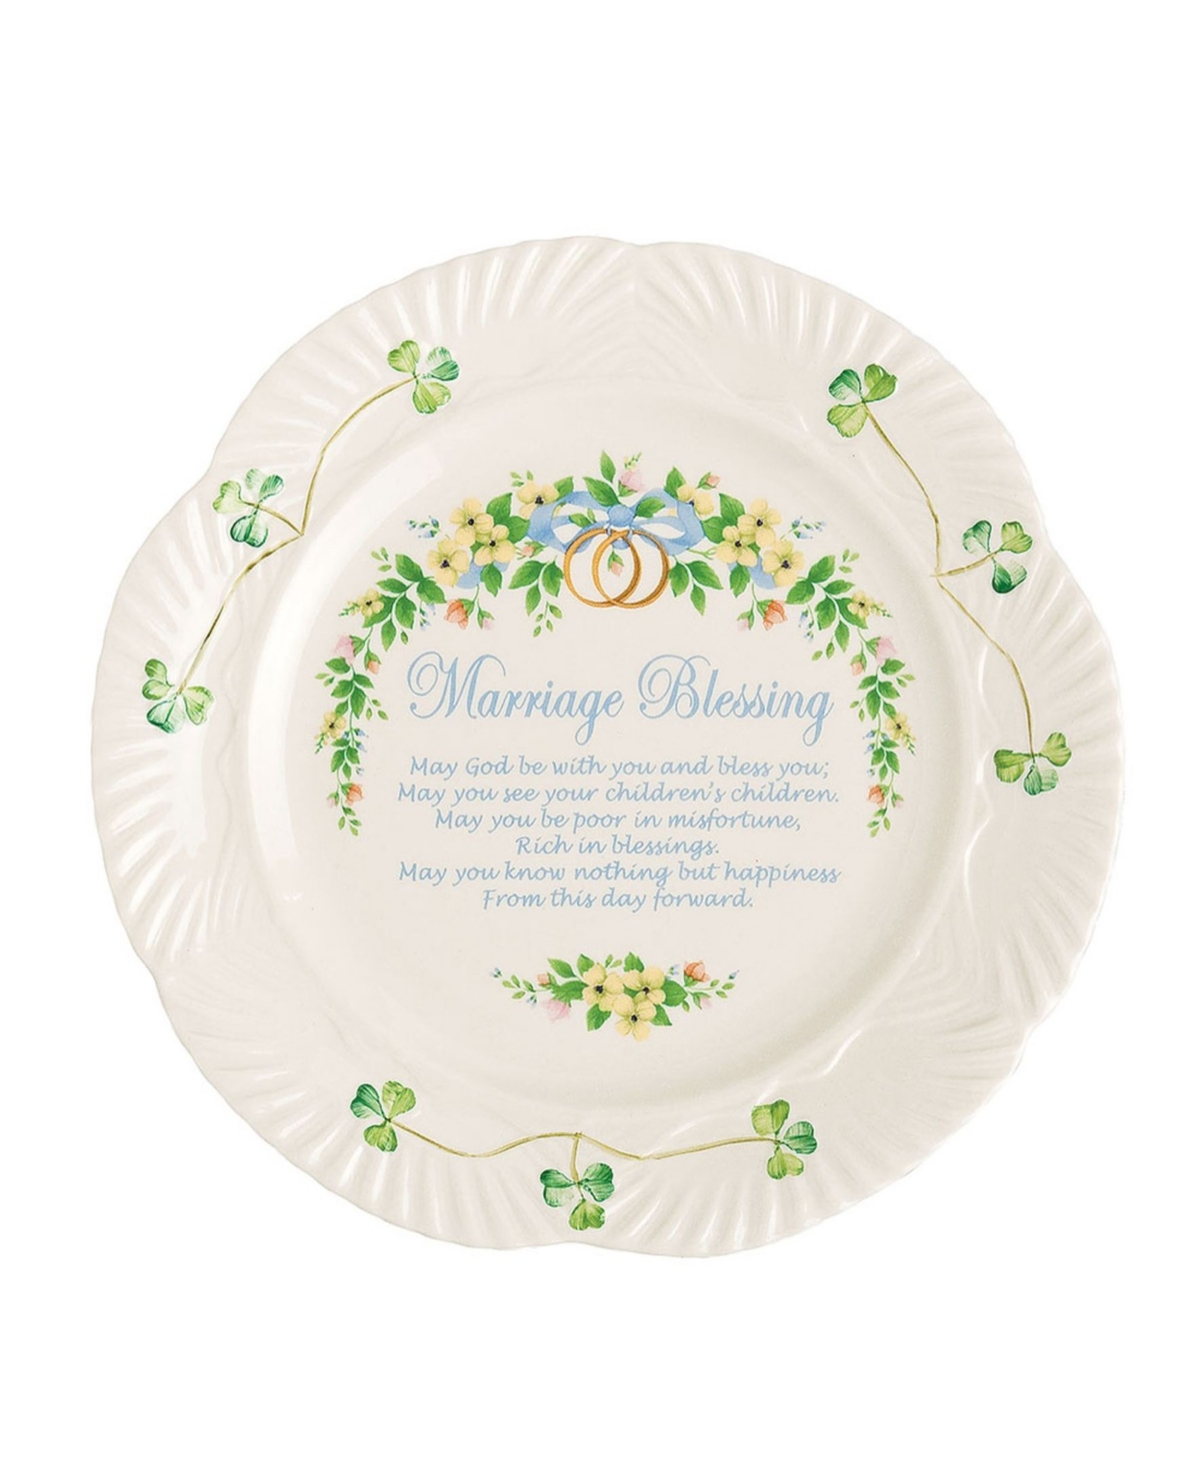 Belleek Pottery Marriage Blessing Plate In Multi